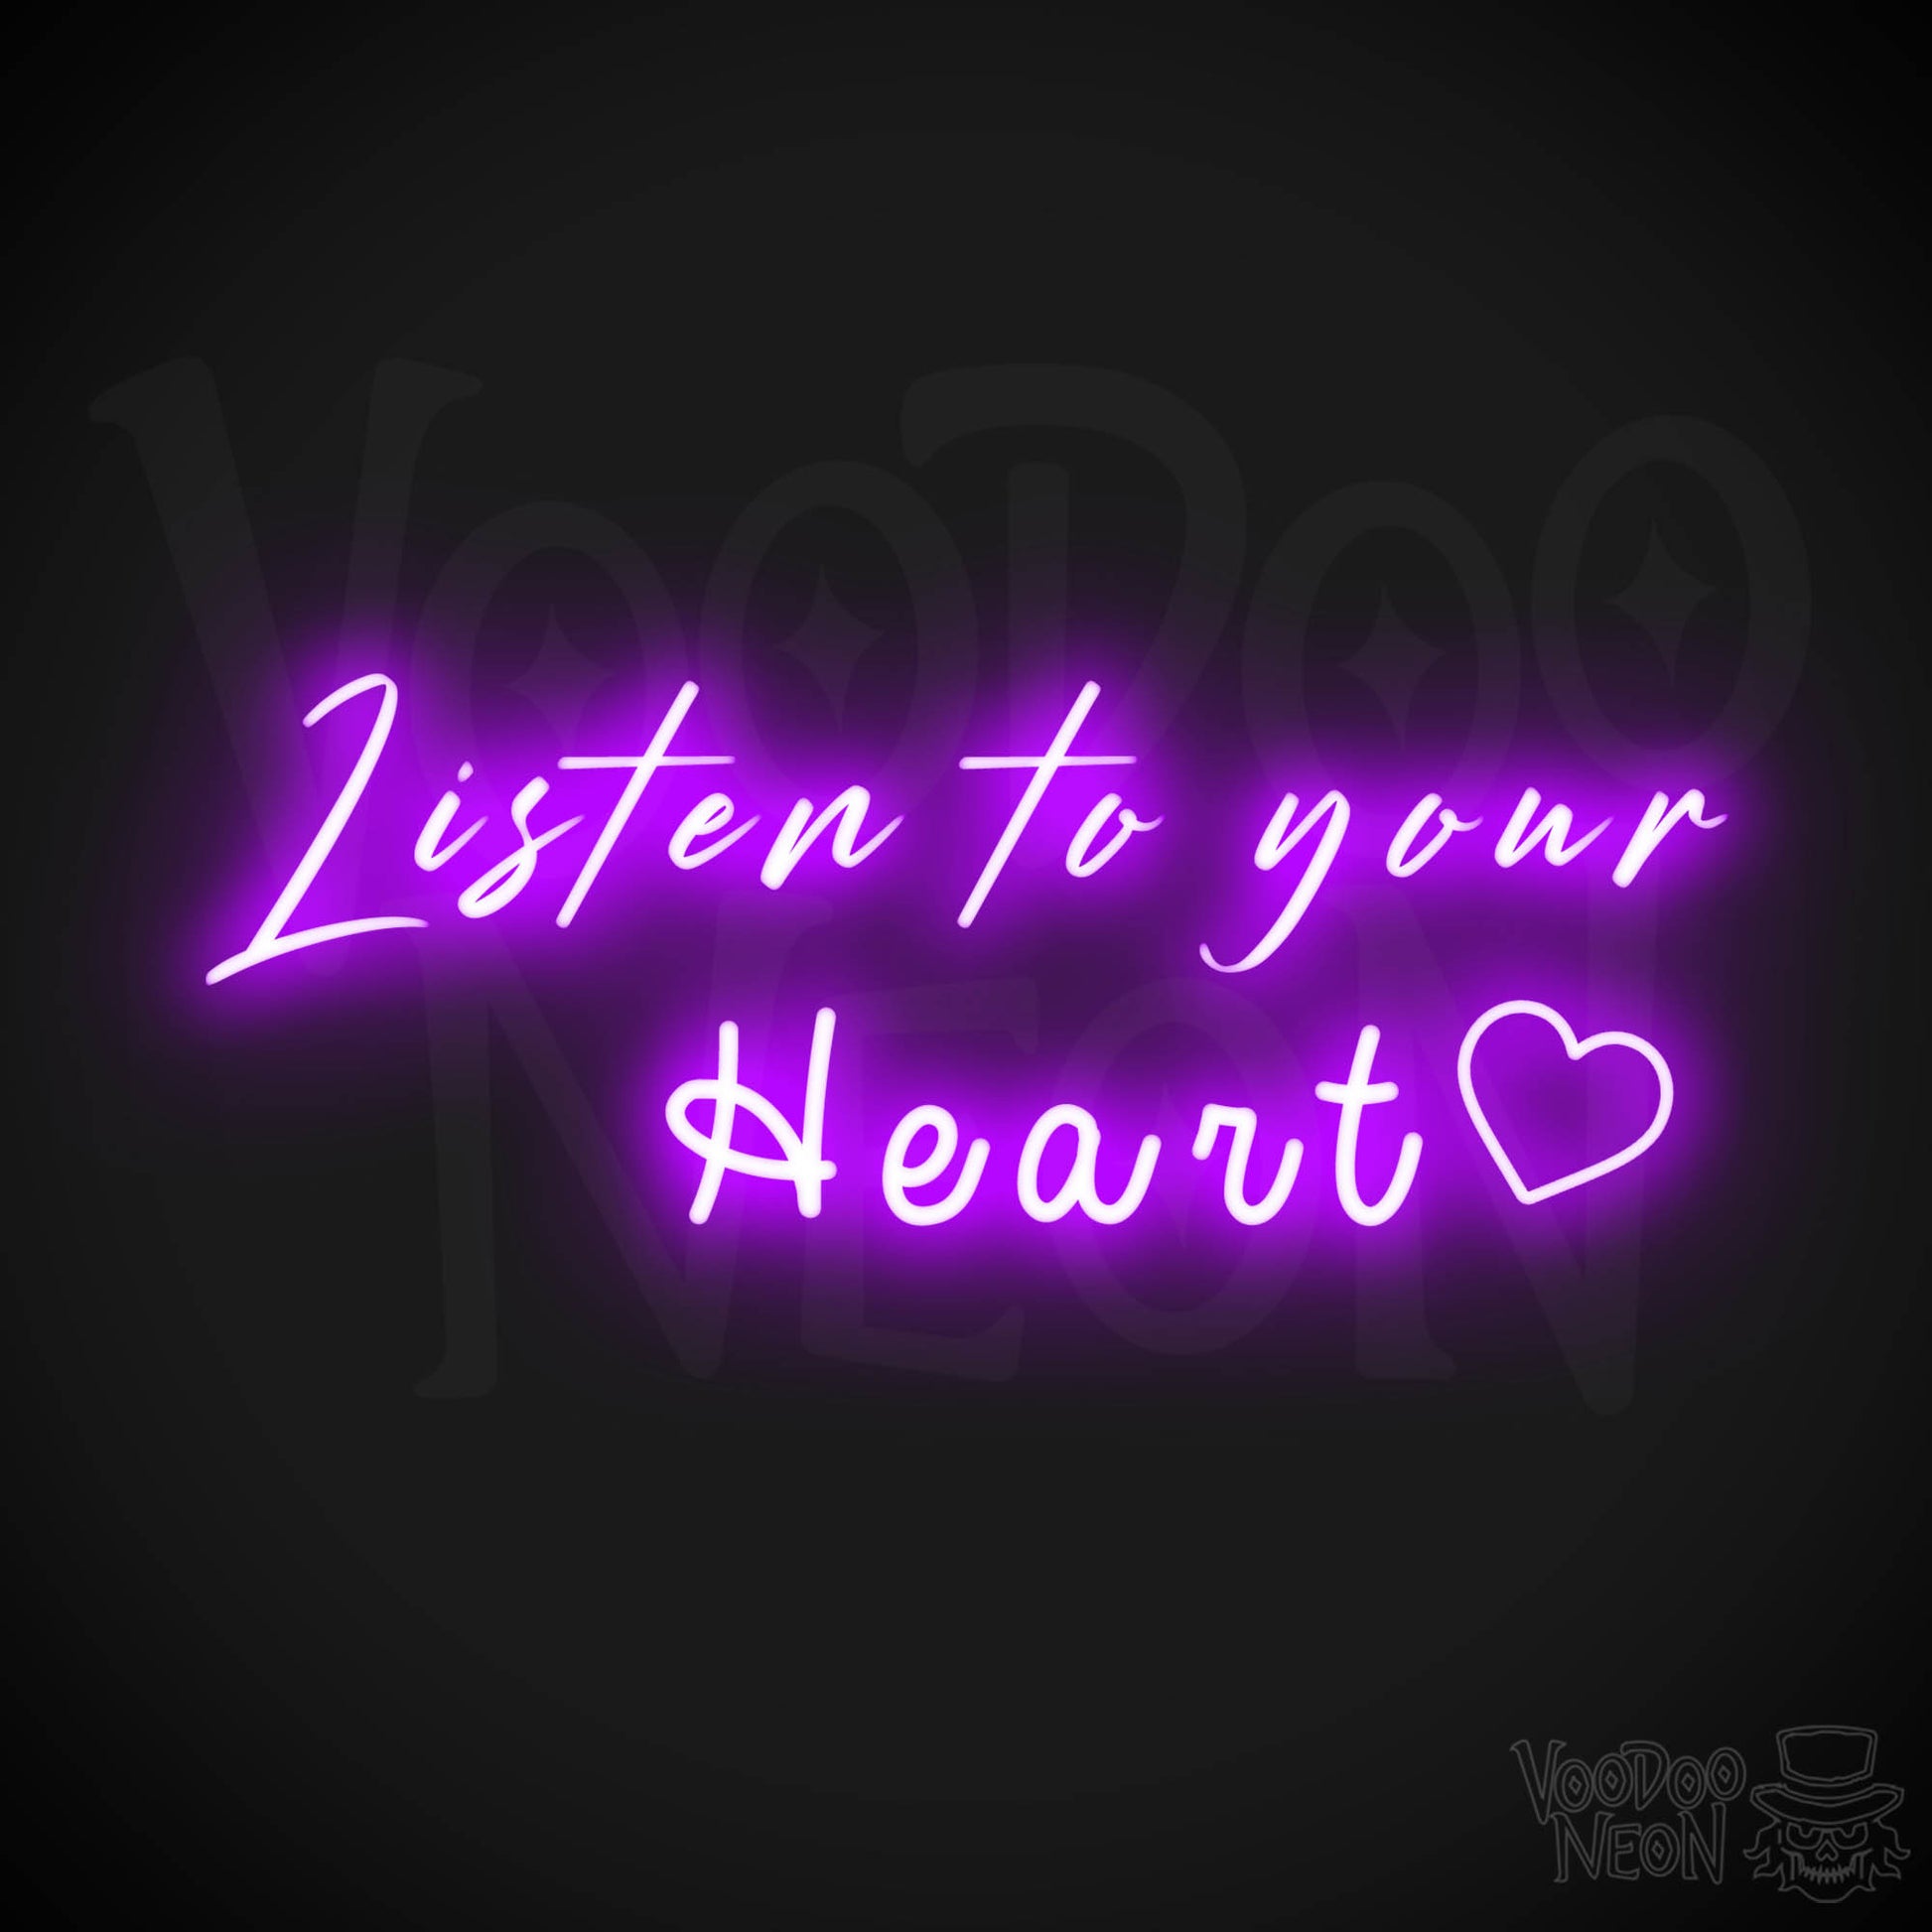 Listen To Your Heart Neon Sign - Neon Listen To Your Heart Sign - Wedding Sign - Color Purple